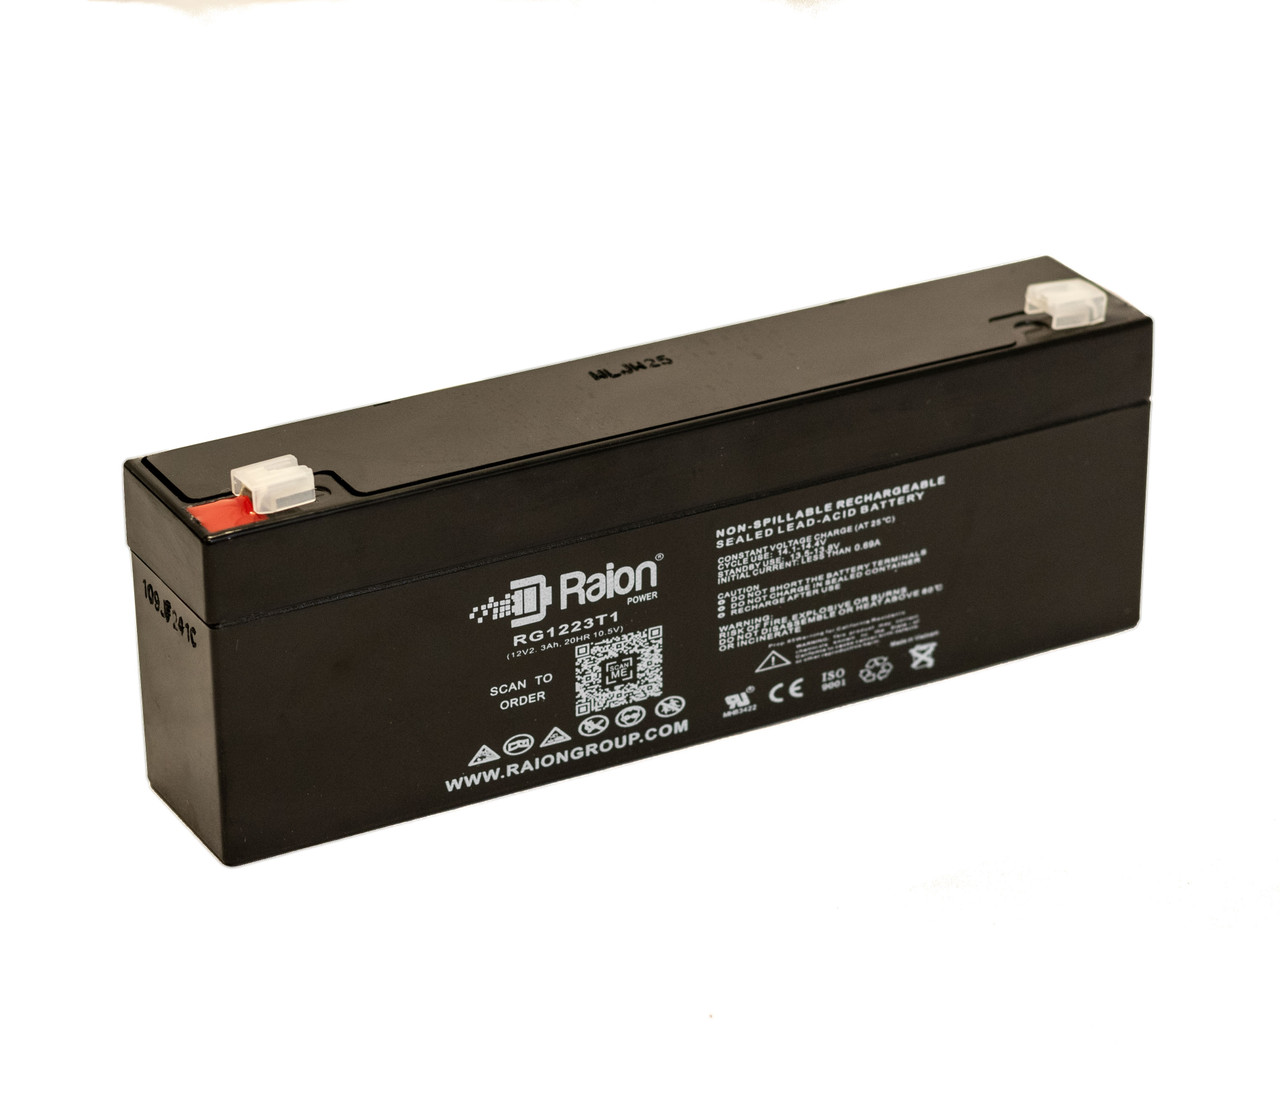 Raion Power RG1223T1 Replacement Battery for Fluke Biomedical Corp 4600